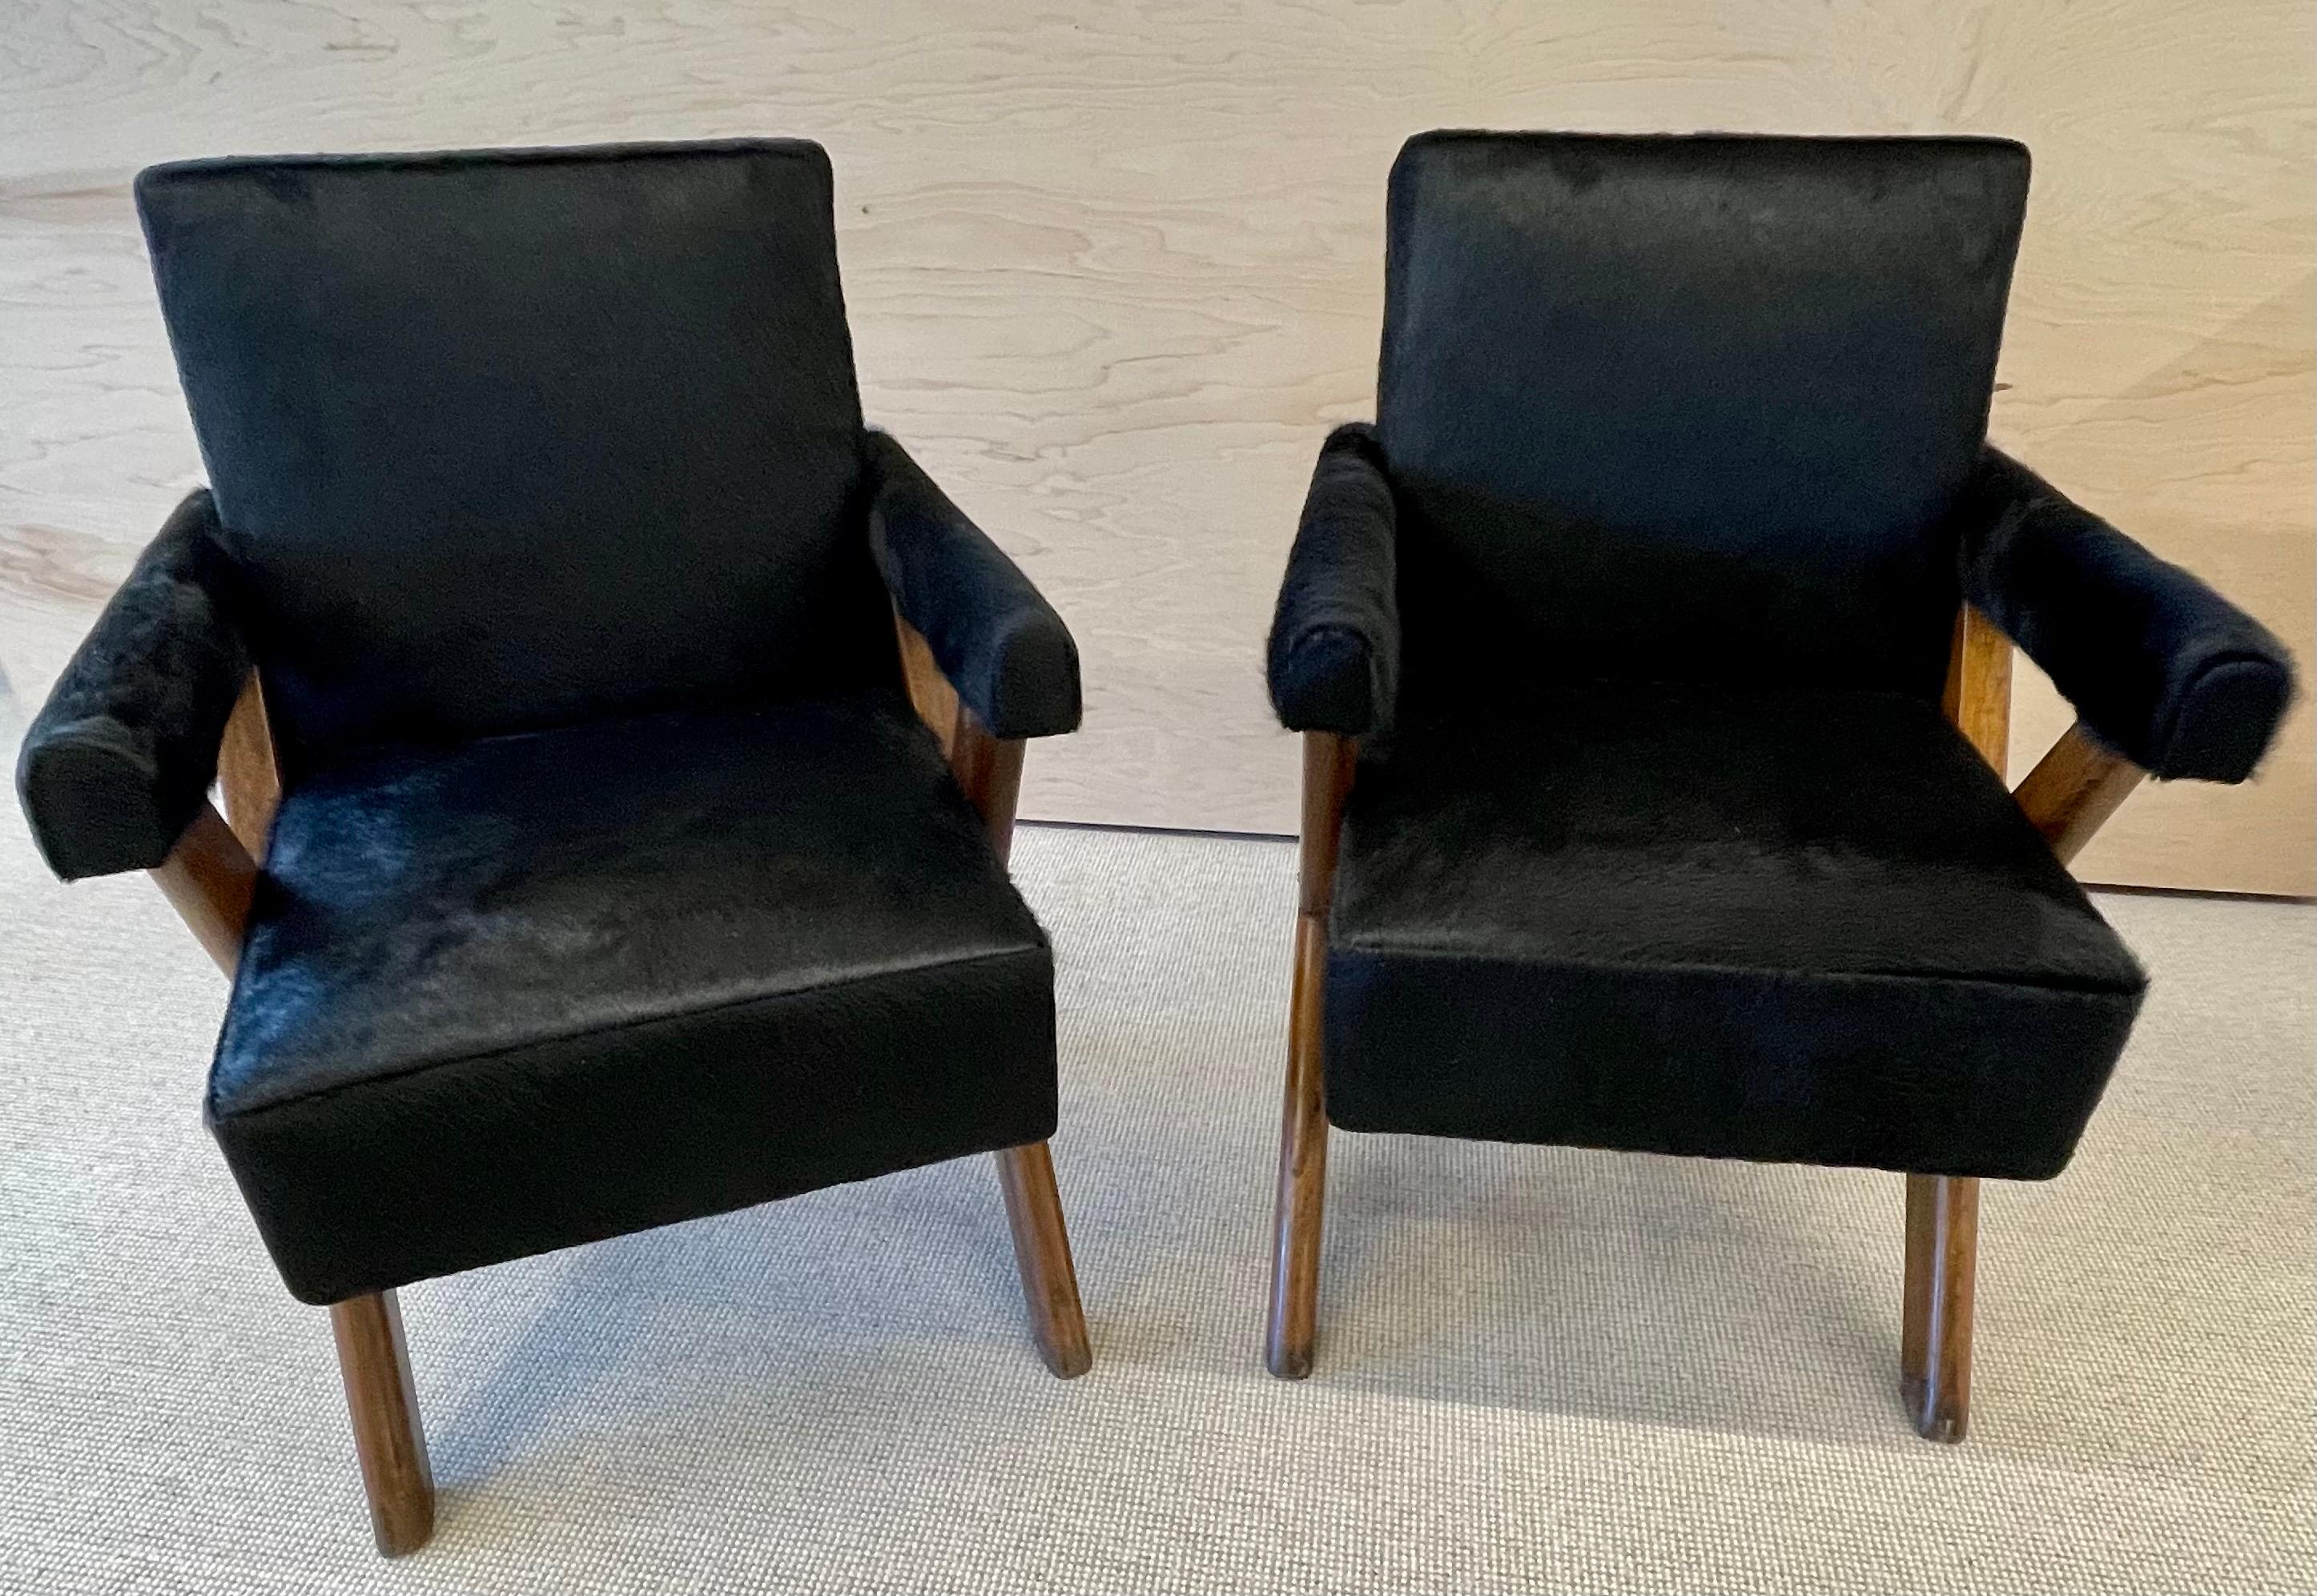 Pair of Mid-Century Modern Upholstered ‘Committee’ Chairs Attr. Pierre Jeanneret 1